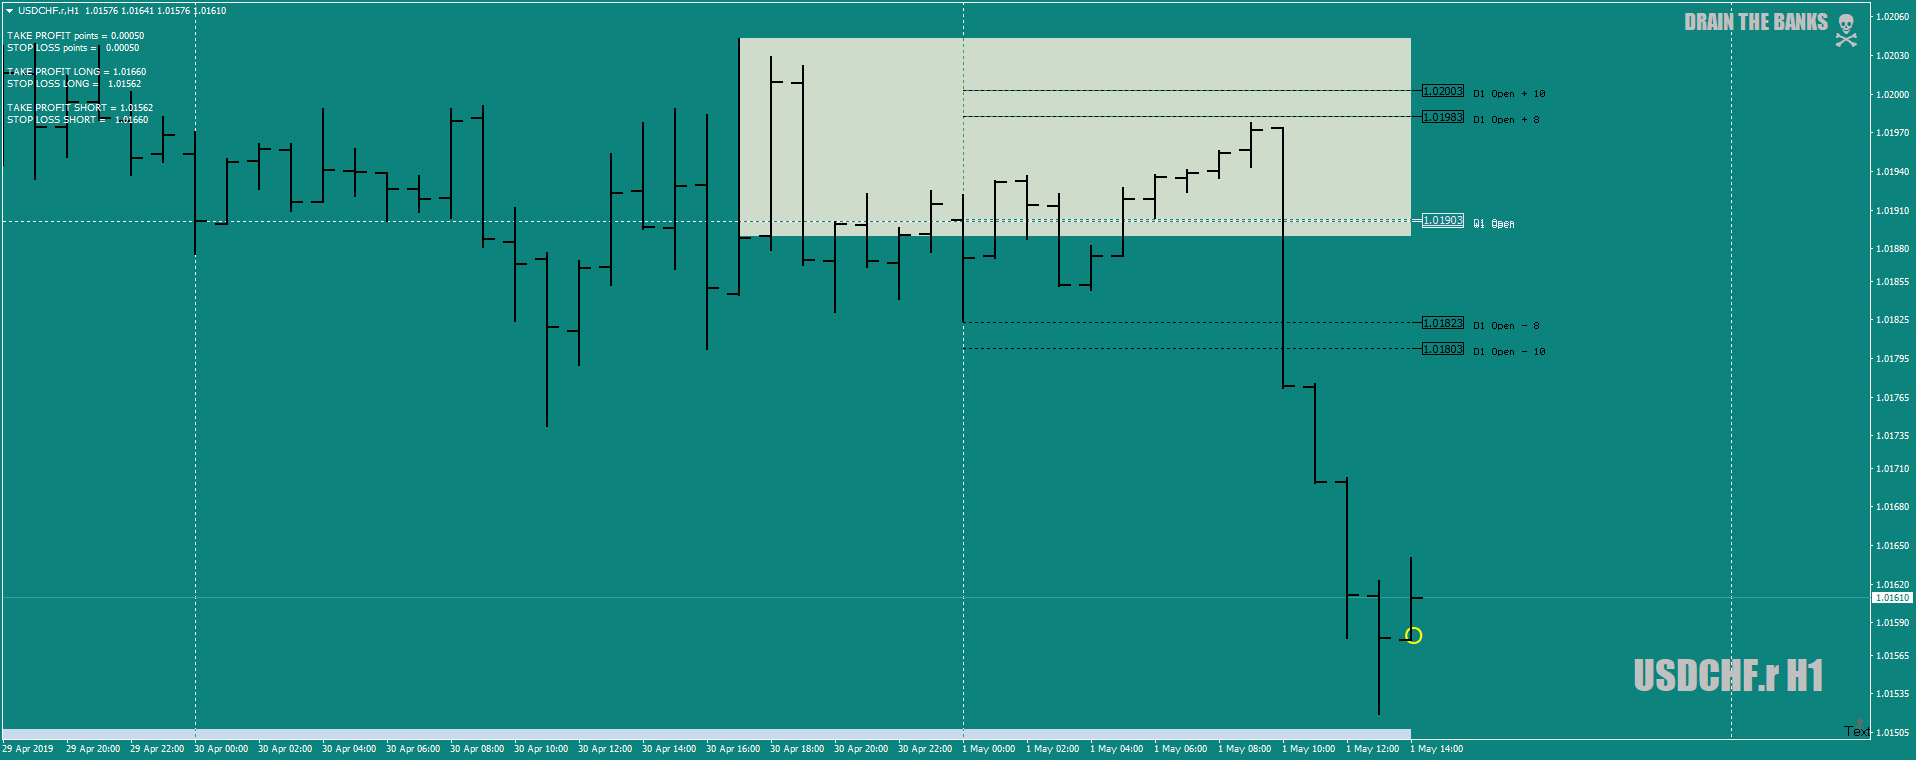 USDCHF.rH1as+5for1-2-3may1st19.png